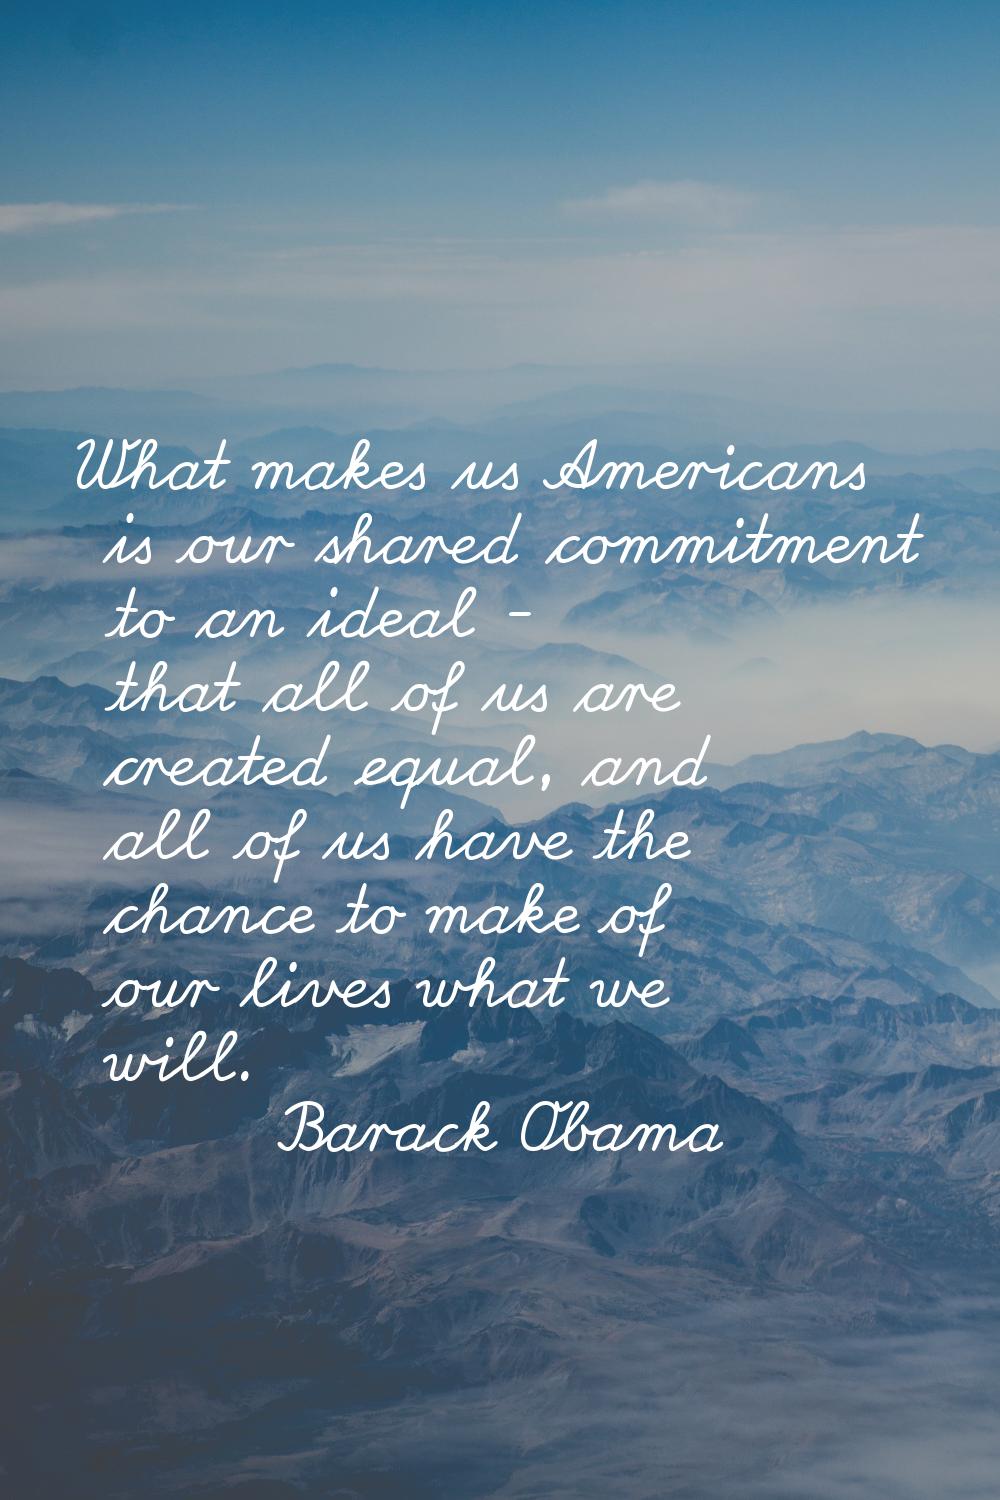 What makes us Americans is our shared commitment to an ideal - that all of us are created equal, an